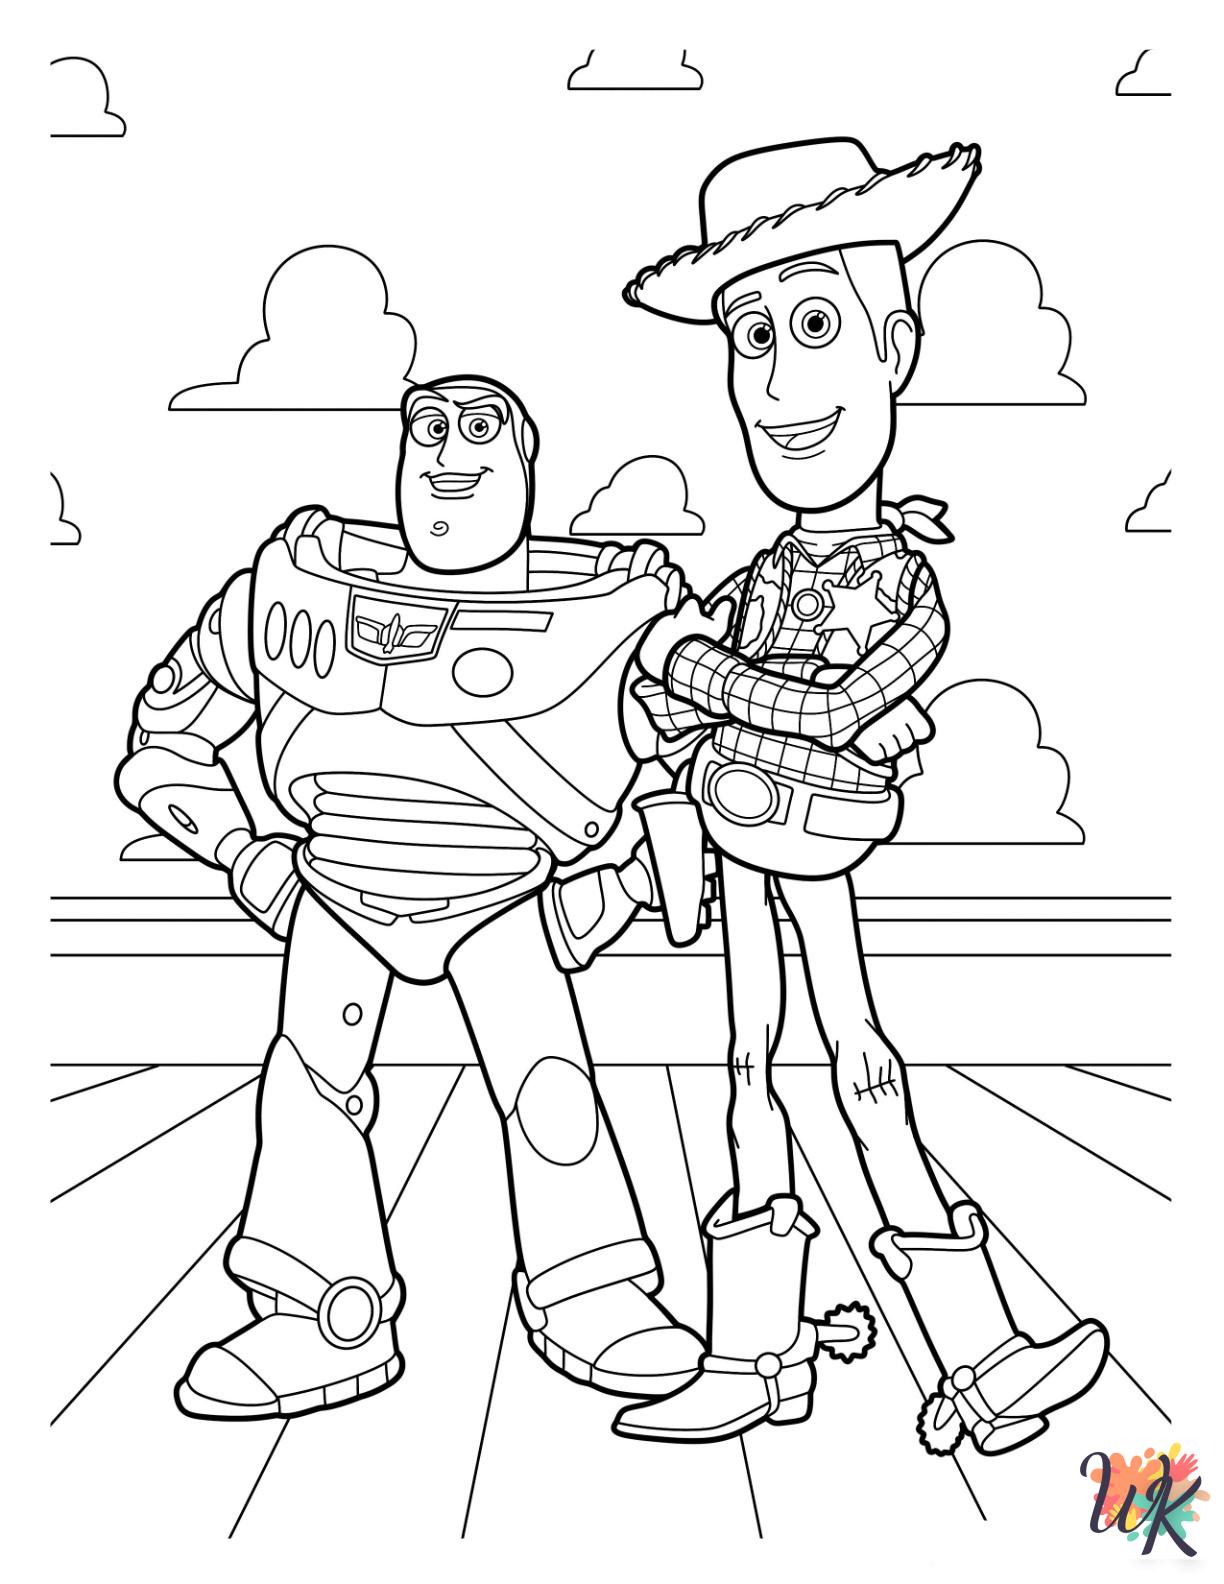 Woody coloring pages for preschoolers